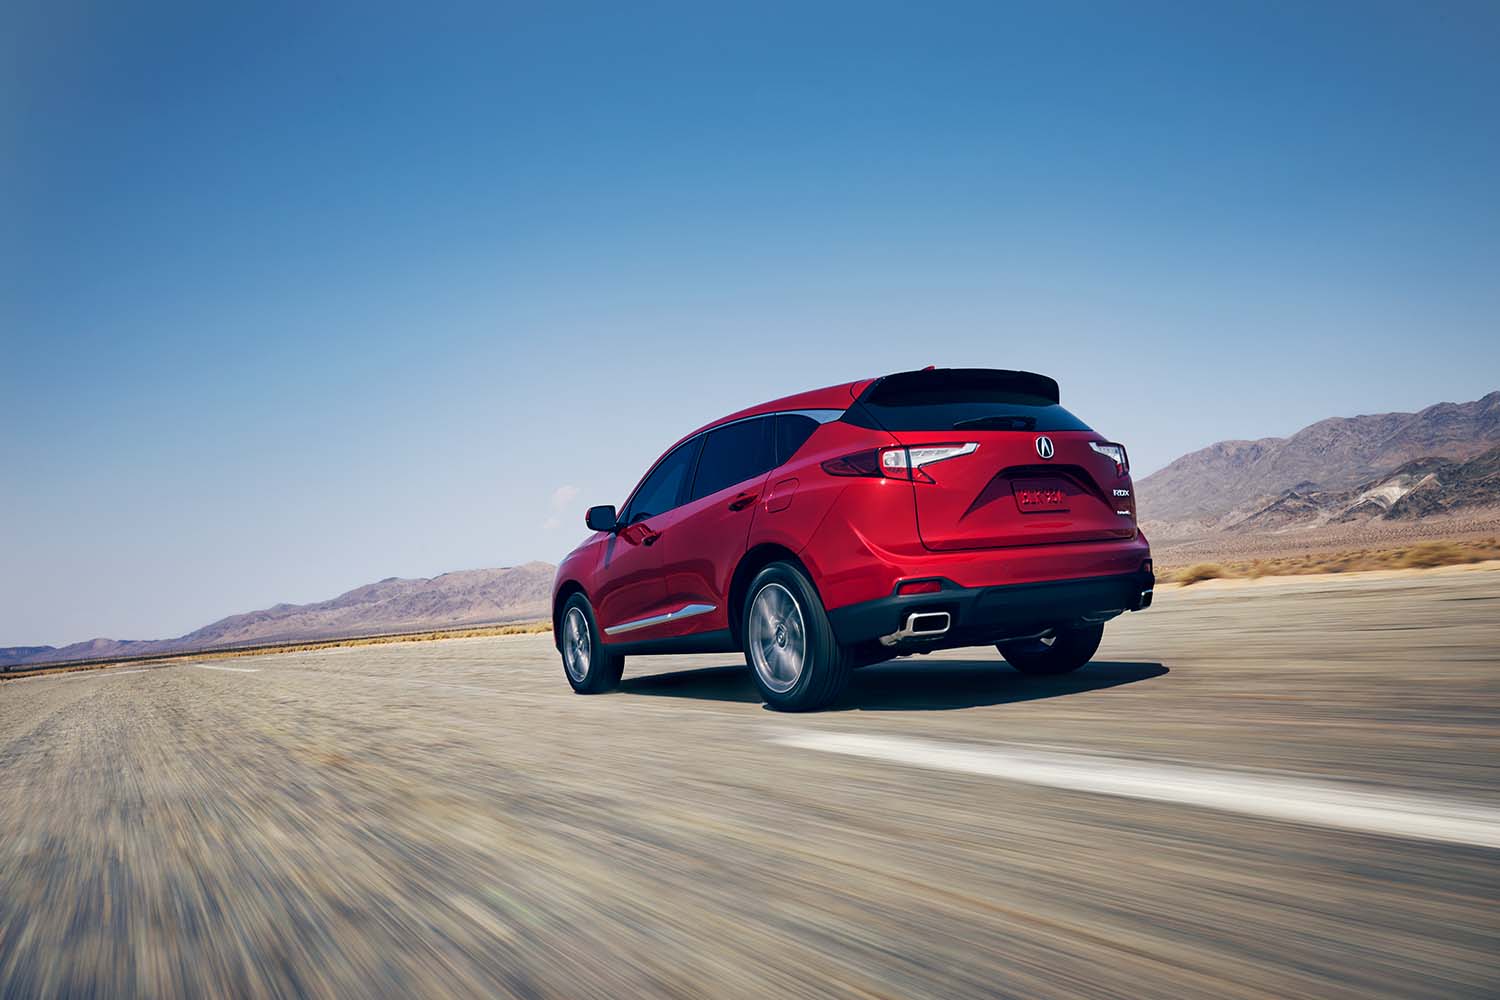 All-New 2022 Acura RDX at Bobby Rahal Acura | 2022 Acura RDX driving away from camera in desert